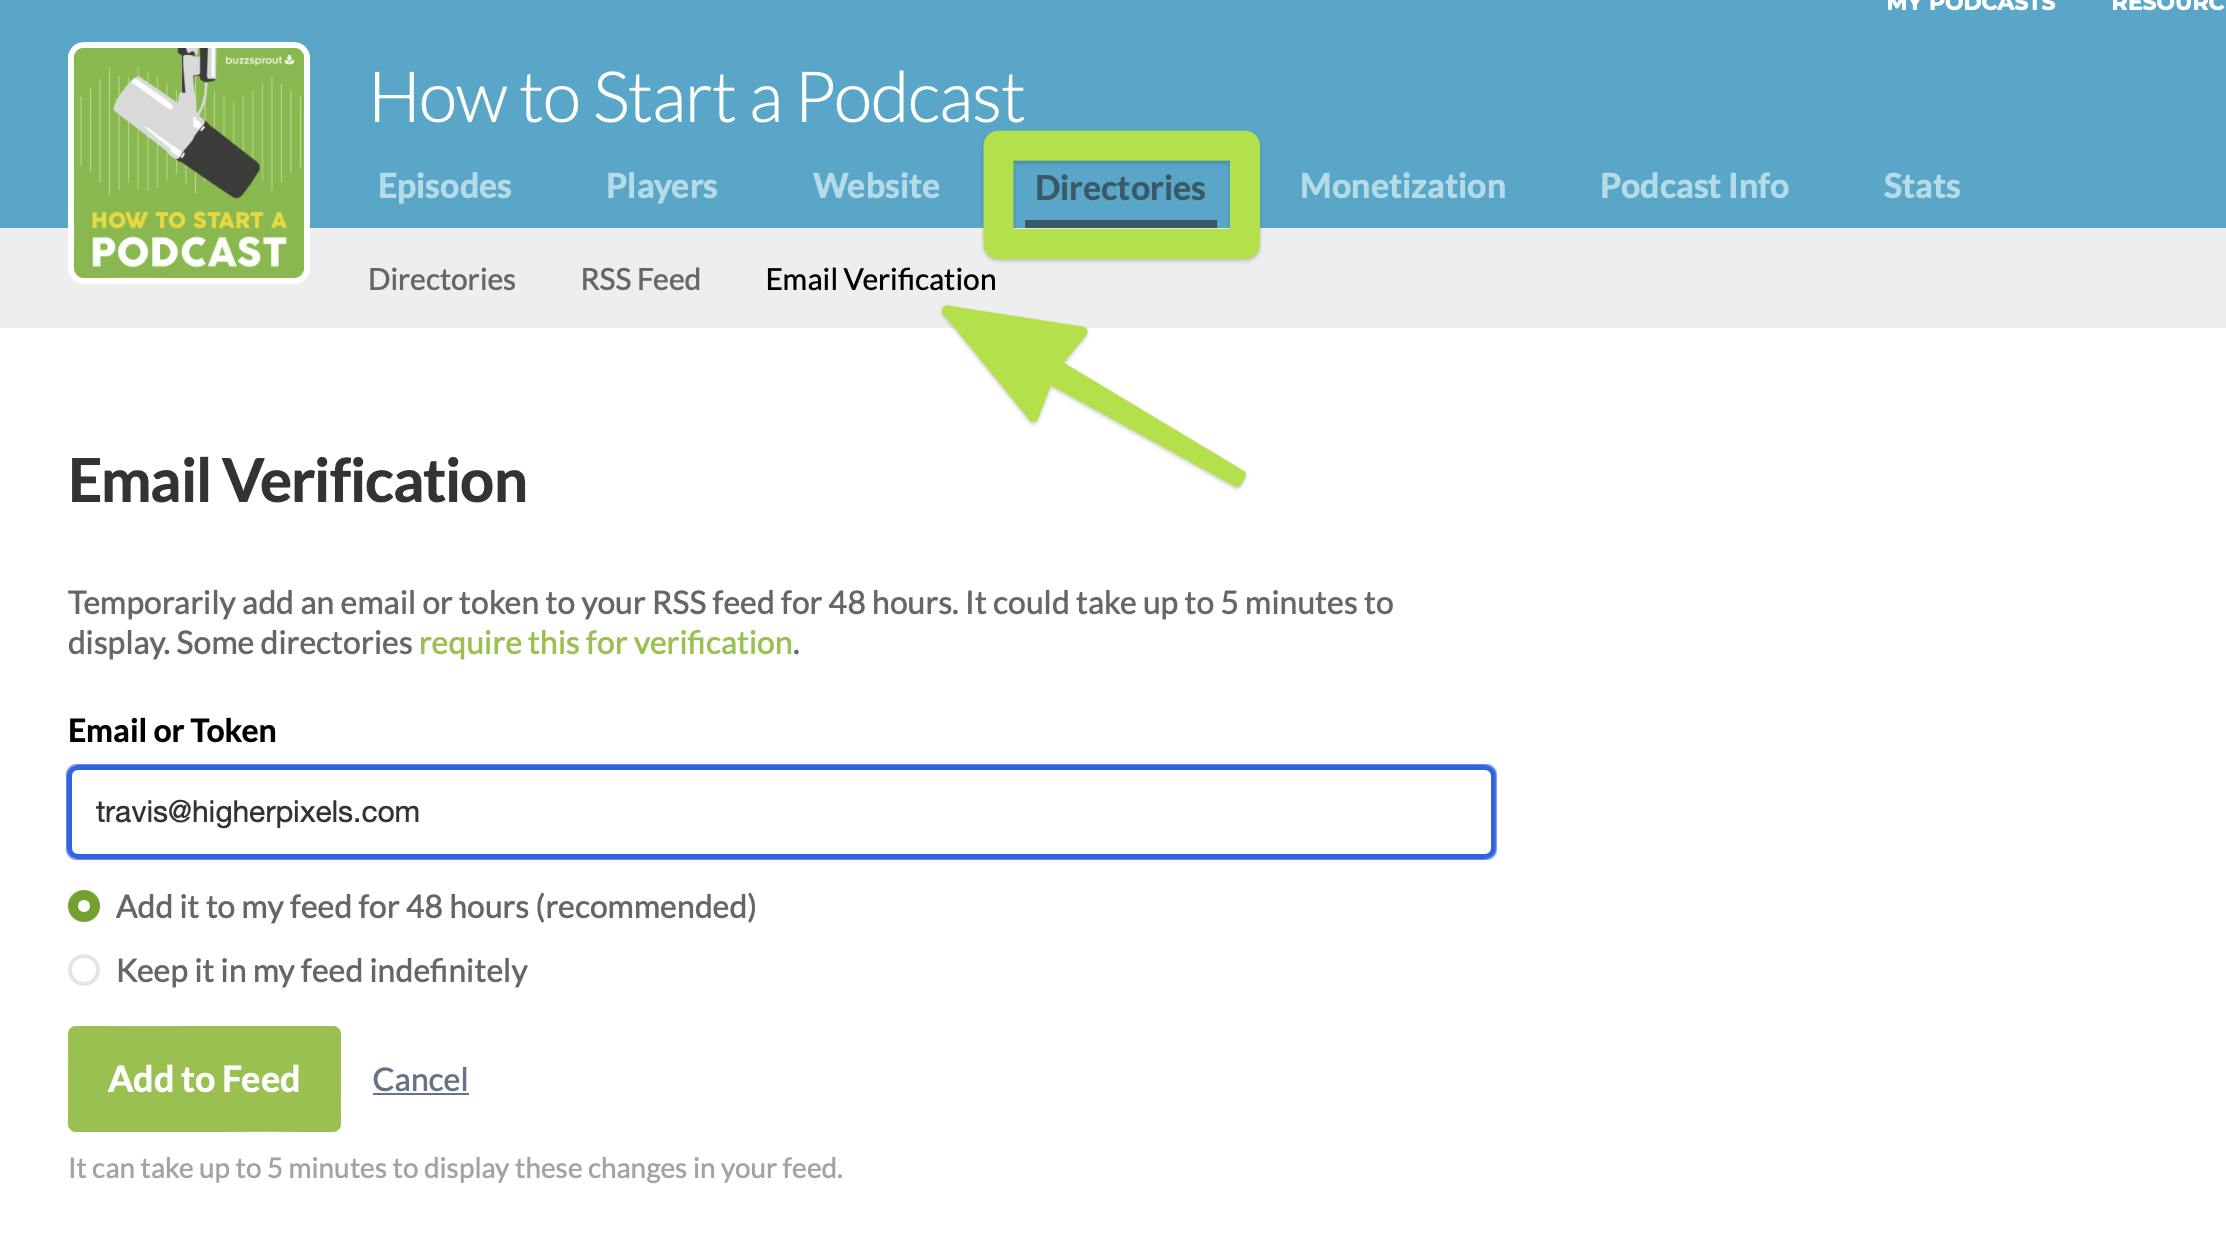 How to start a podcast on Spotify in 6 easy steps